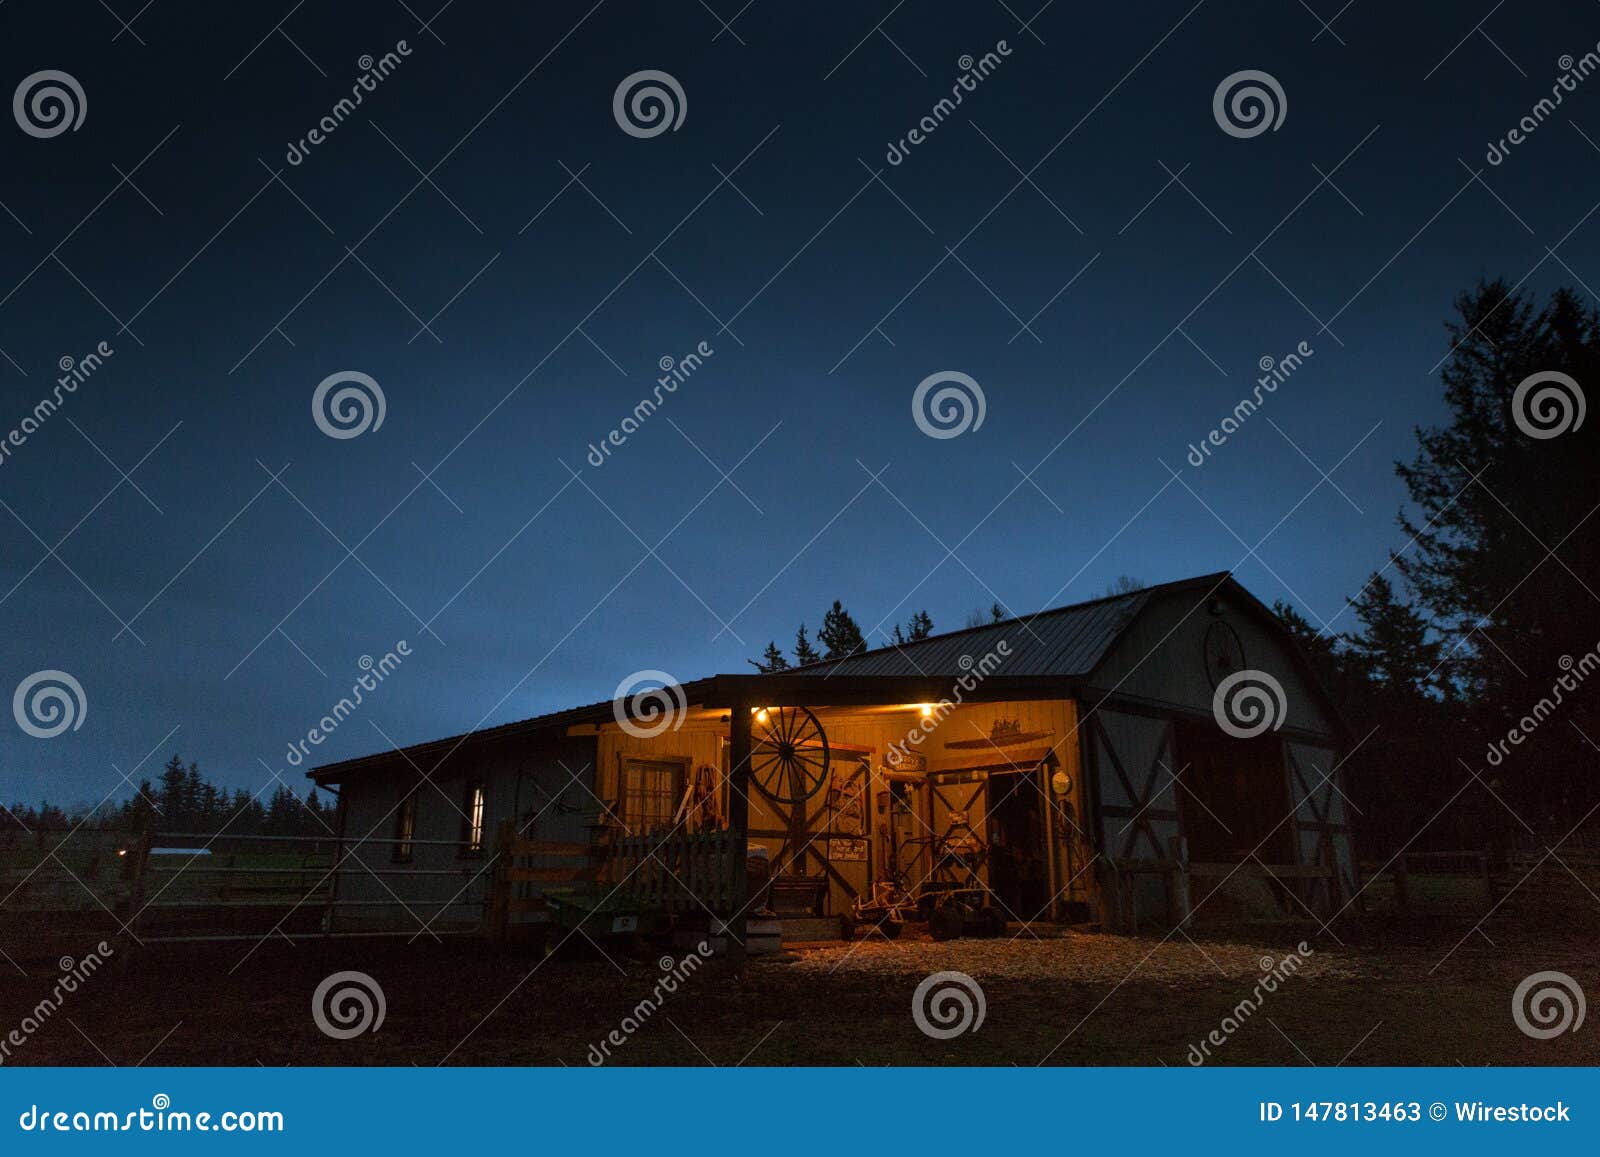 An Old Wooden Barn At Farm In The Woods Under Beautiful Night Sky Stock Image Image Of Outdoor